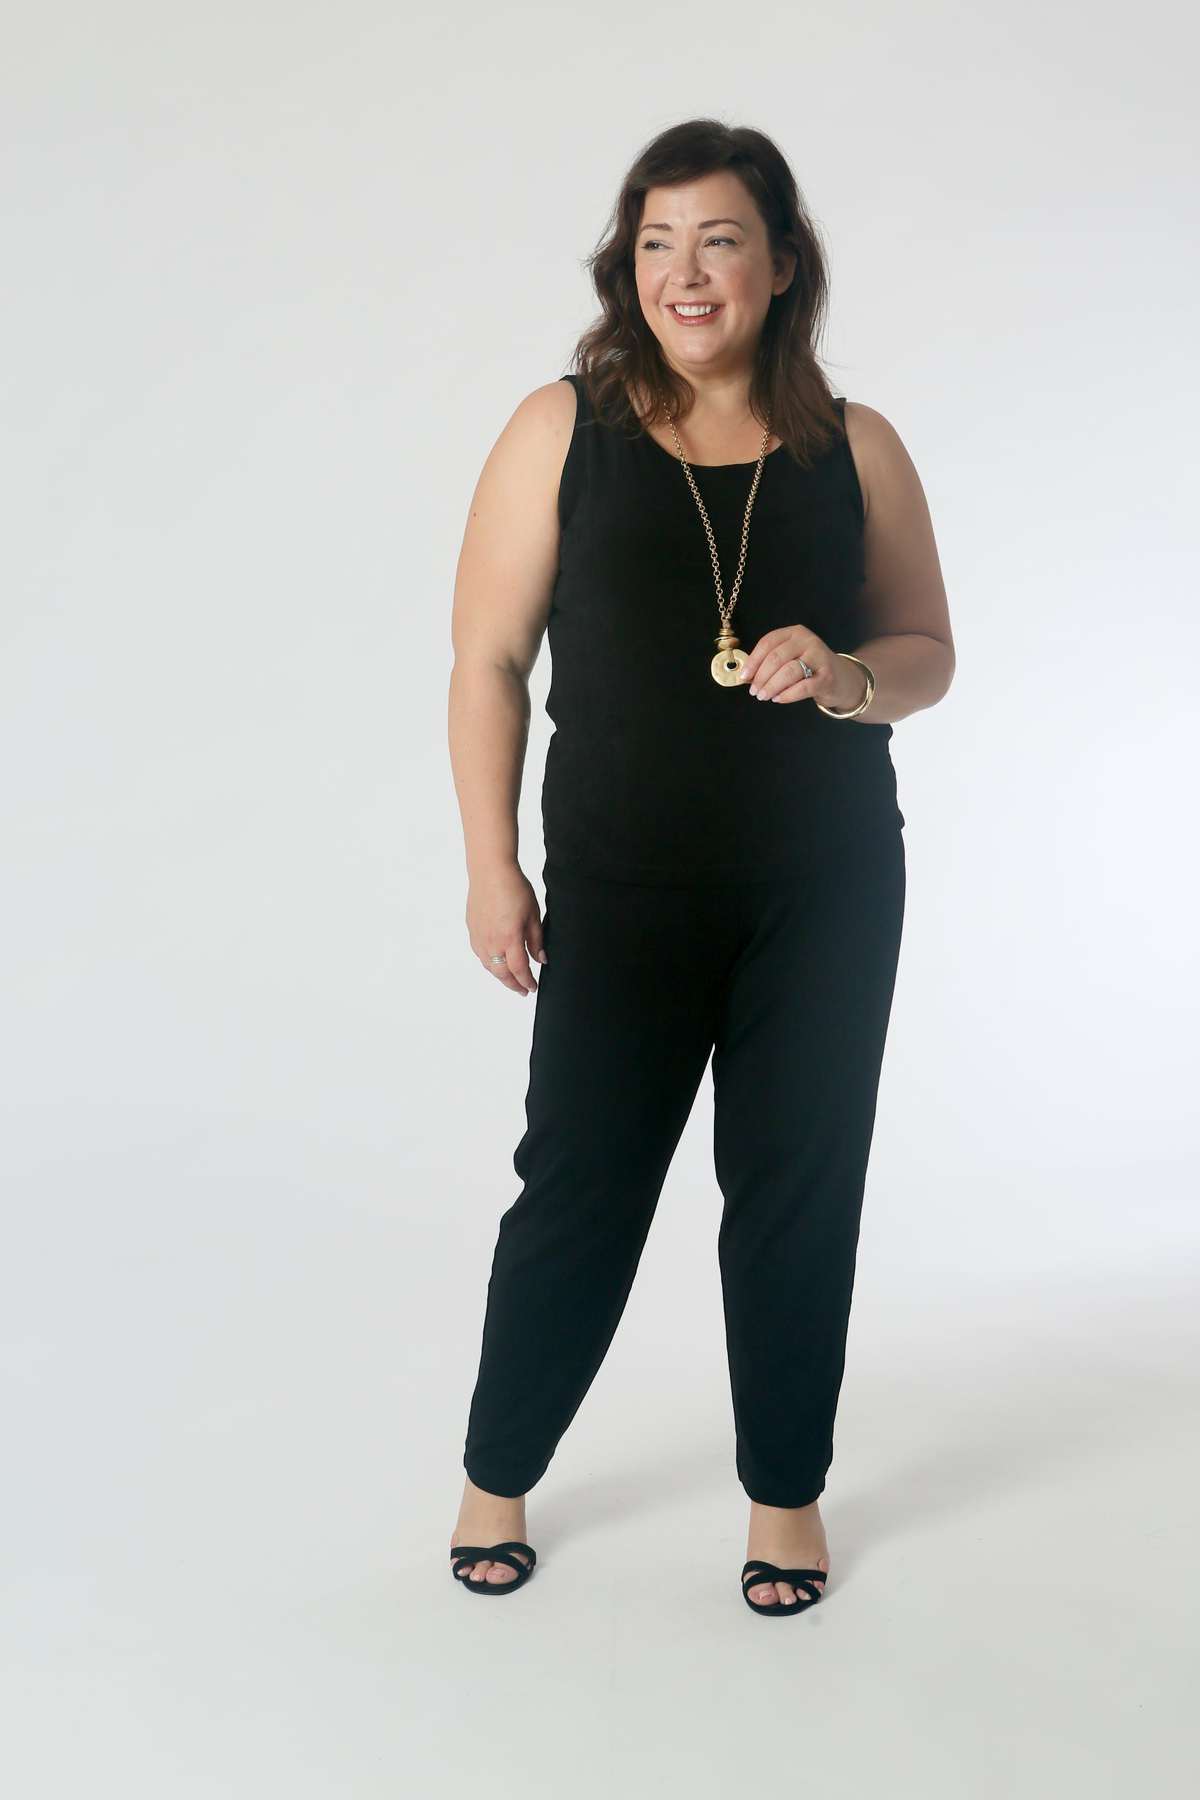 Jumpsuit and Jive: Tuck the tank into the pants for a jumpsuit effect. Add a pendant necklace to elongate the figure.